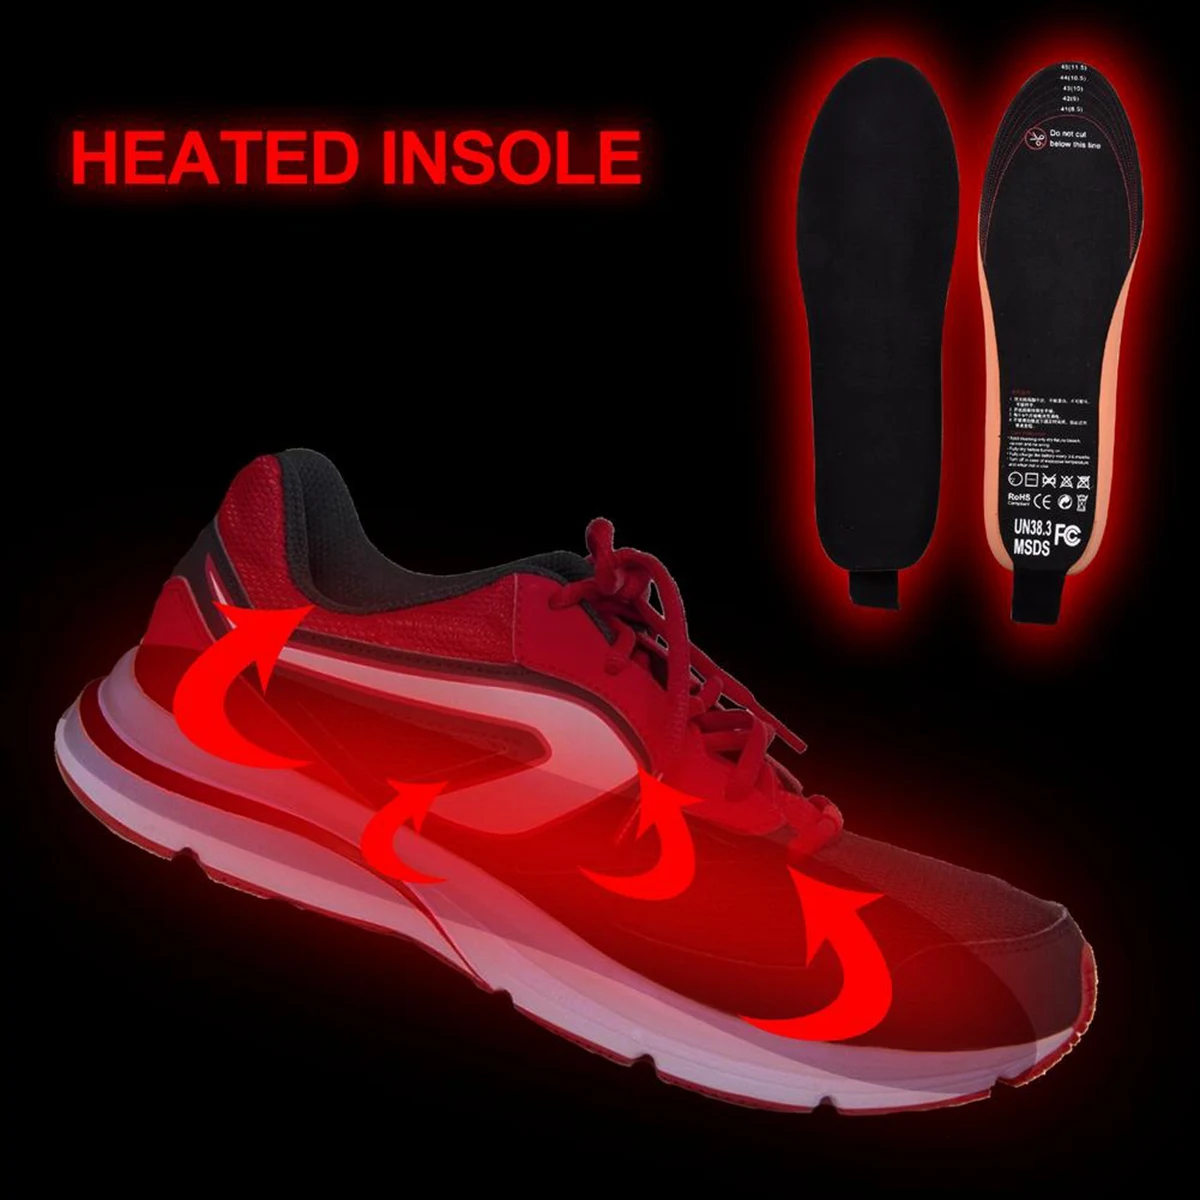 

Electric Heating Insole Adjustable Temperature Foot Pad 2100MAh USB Charging Foot Warmer Insole 41-45 Yards